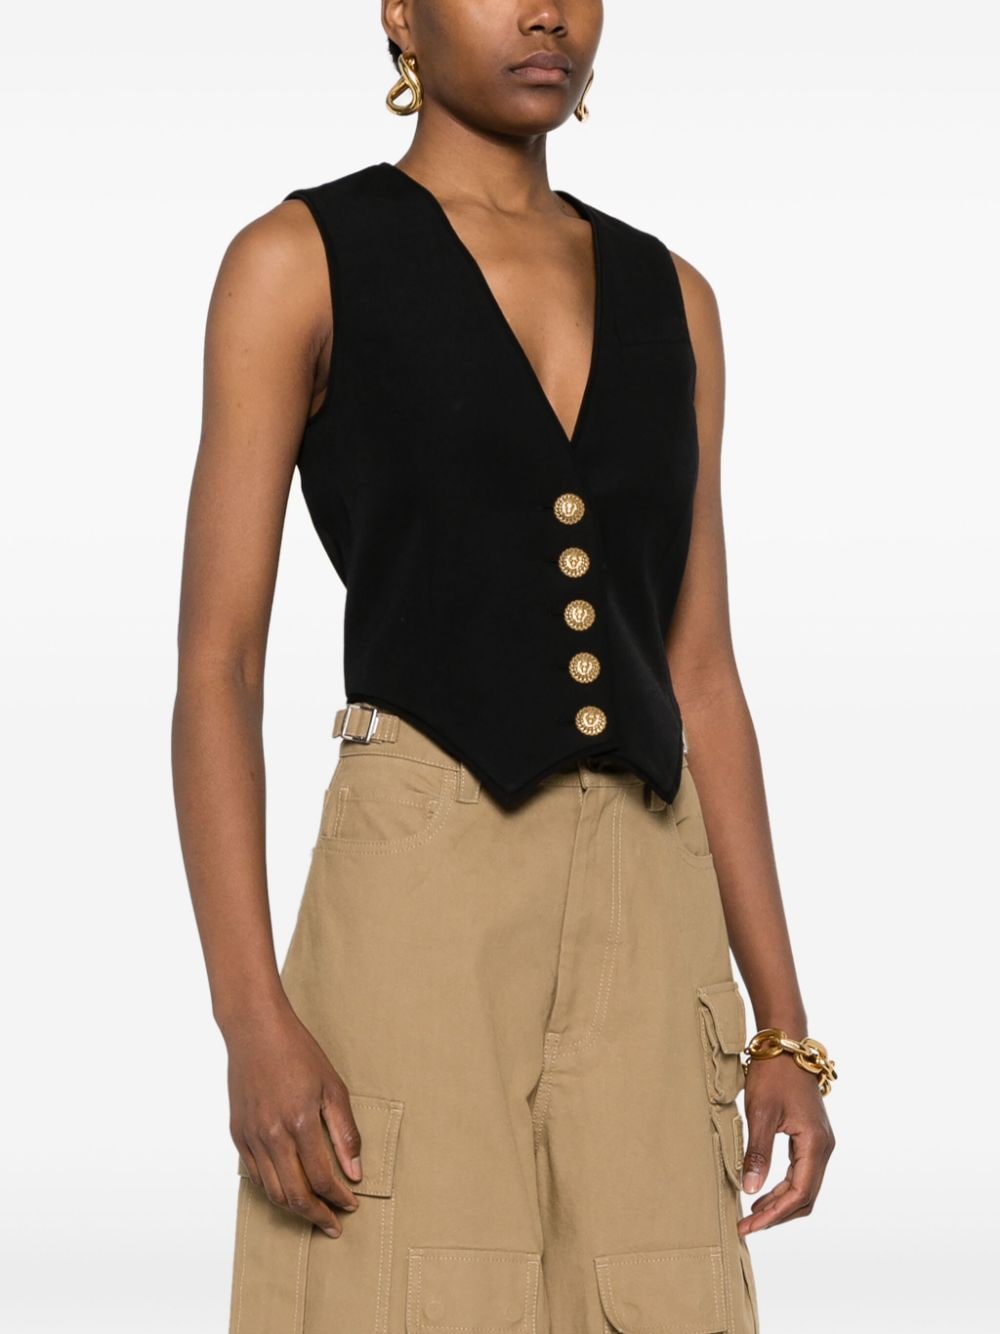 BALMAIN Black V-Neck Vest with Iconic Lion Buttons in Gold-Tone Metal